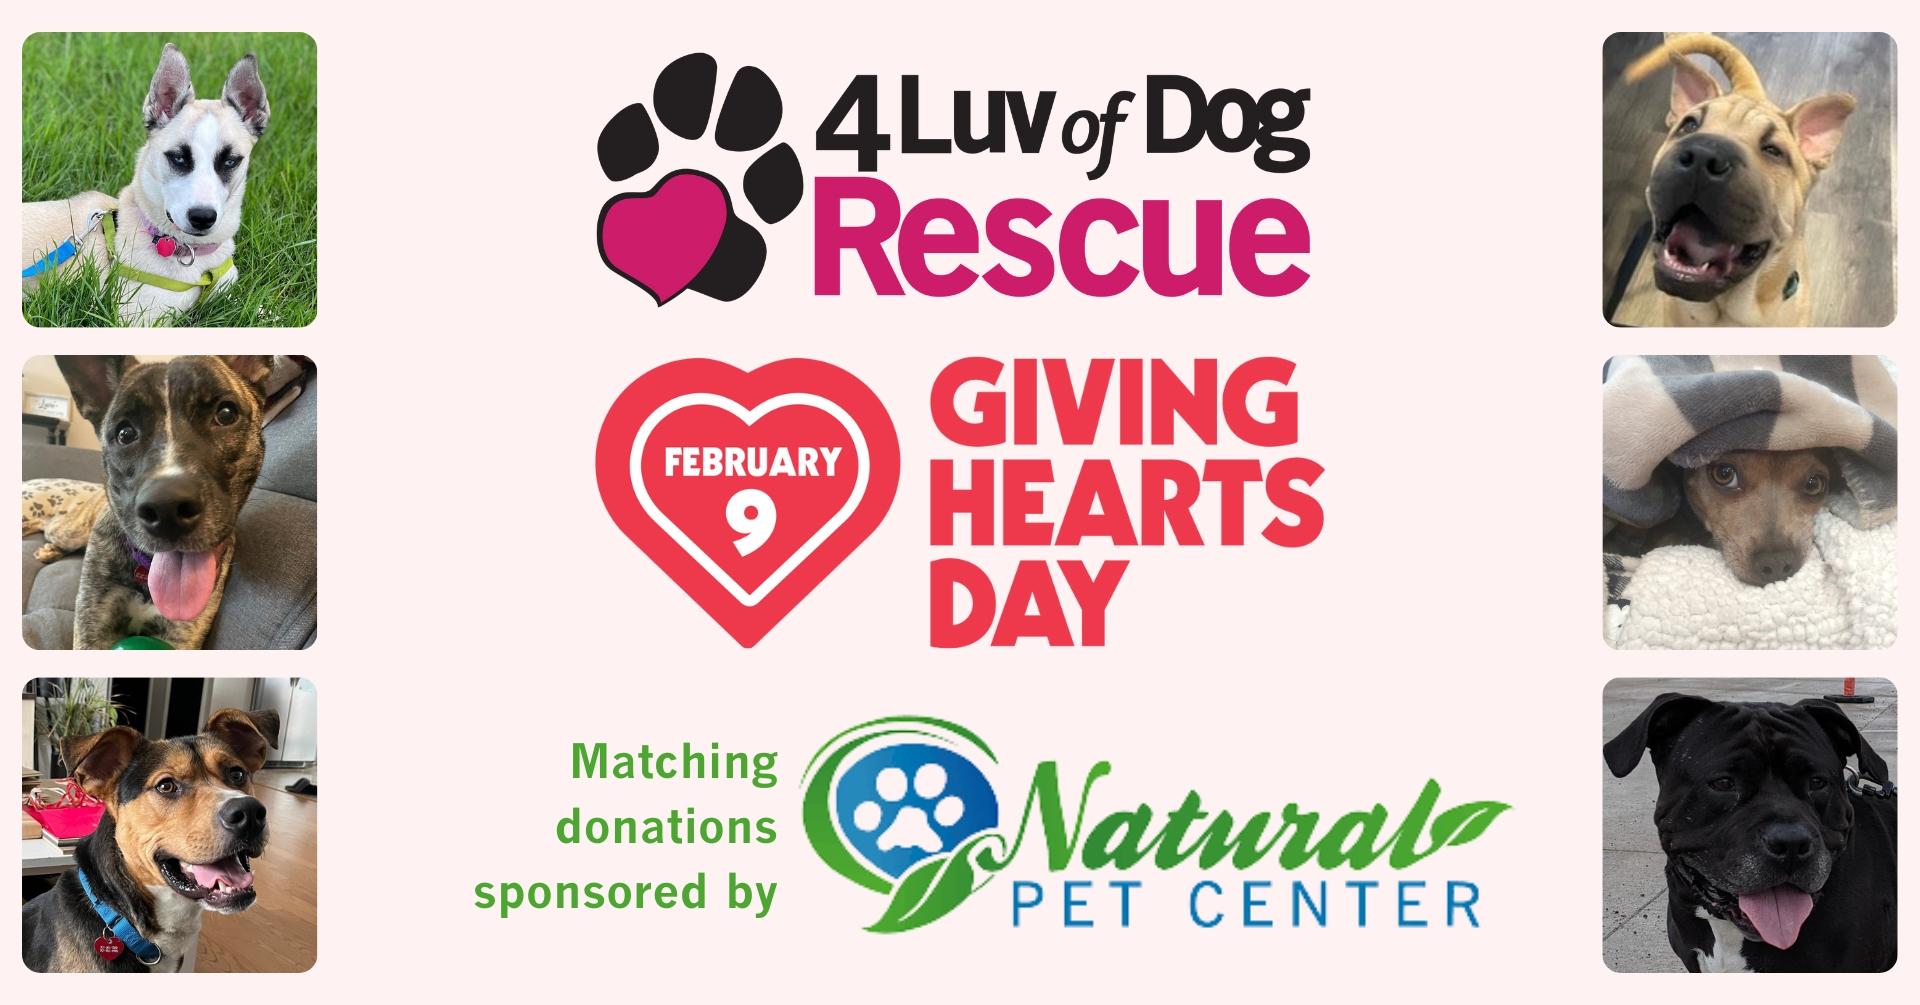 Giving Hearts Day - 4 Luv of Dog Rescue Event - February 9, 2023